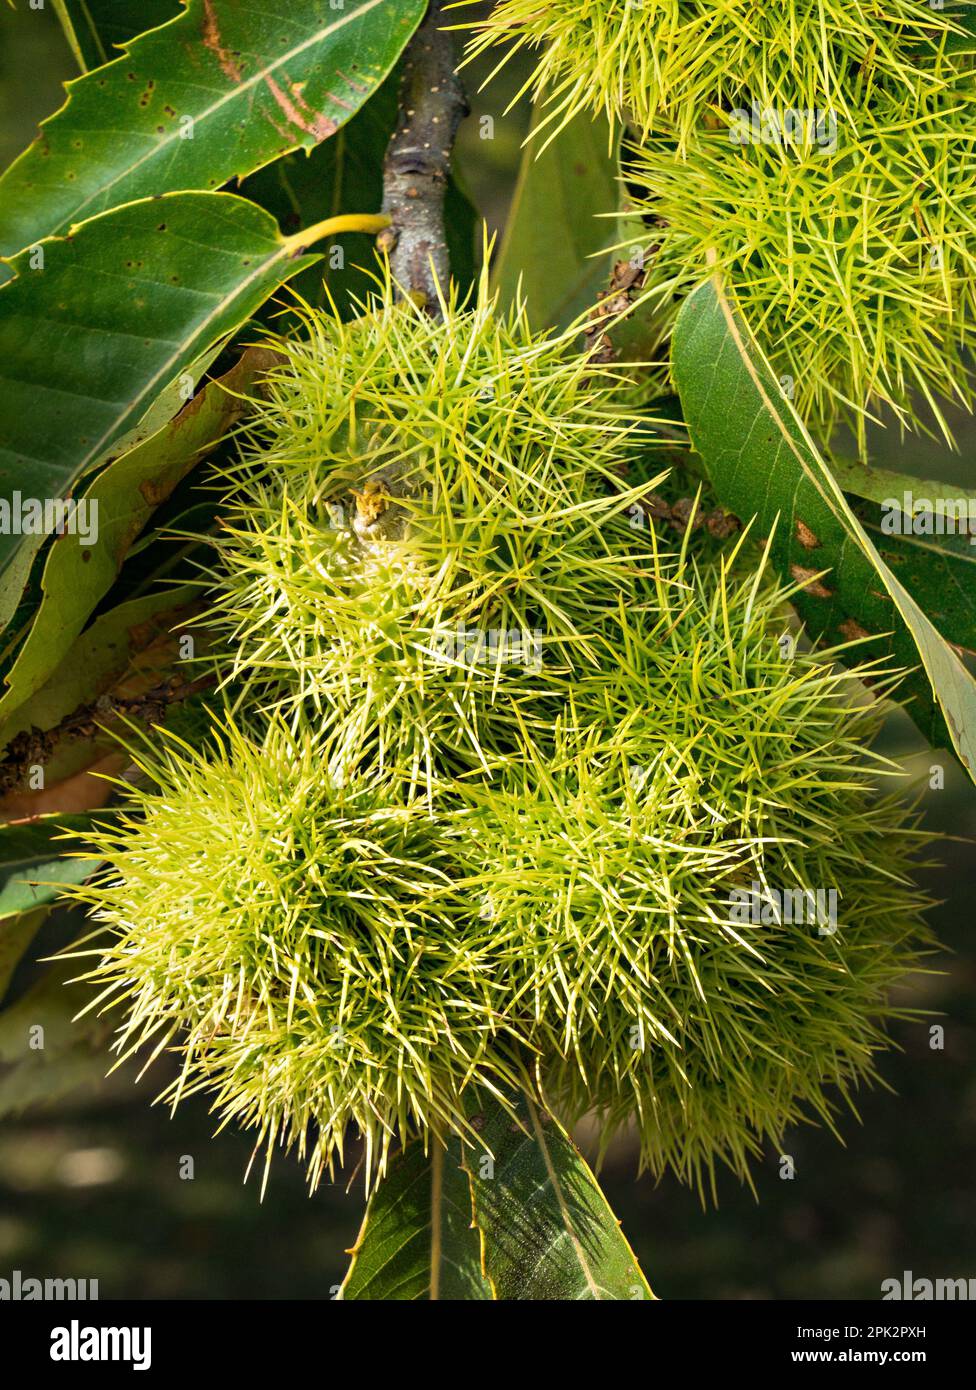 Closeup of spiky Sweet Chestnut (Castanea sativa) fruits growing on tree with leaves in September, Bradgate Park Leicestershire, England, UK Stock Photo